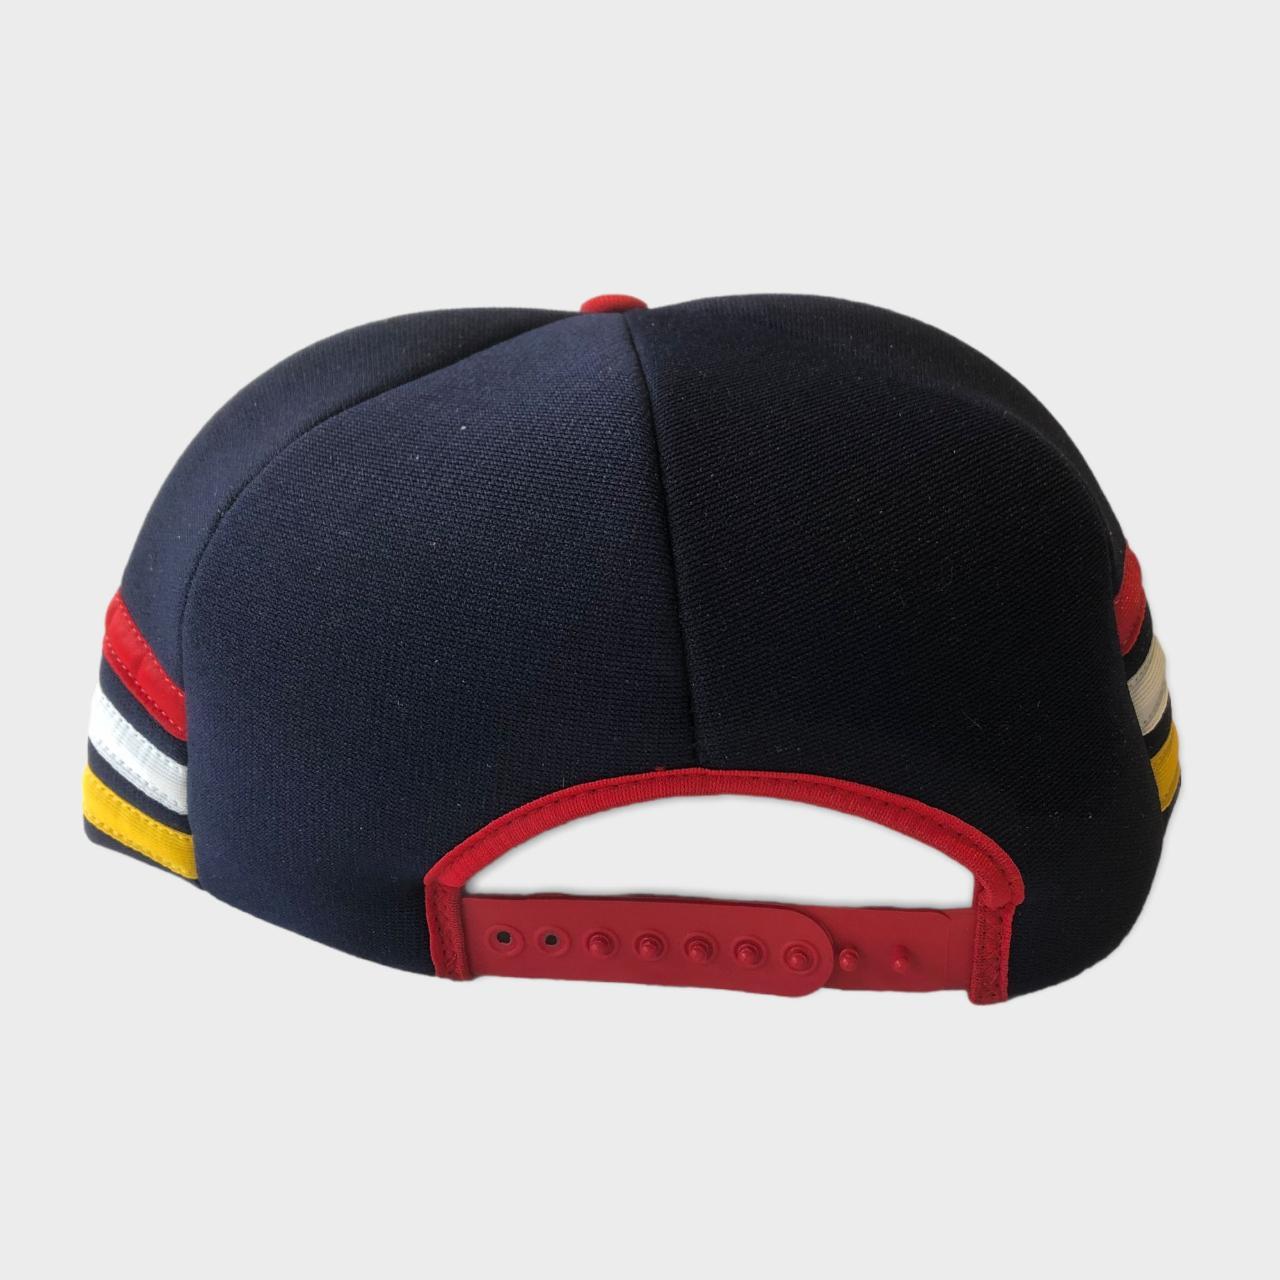 Men's Navy and White Hat (4)